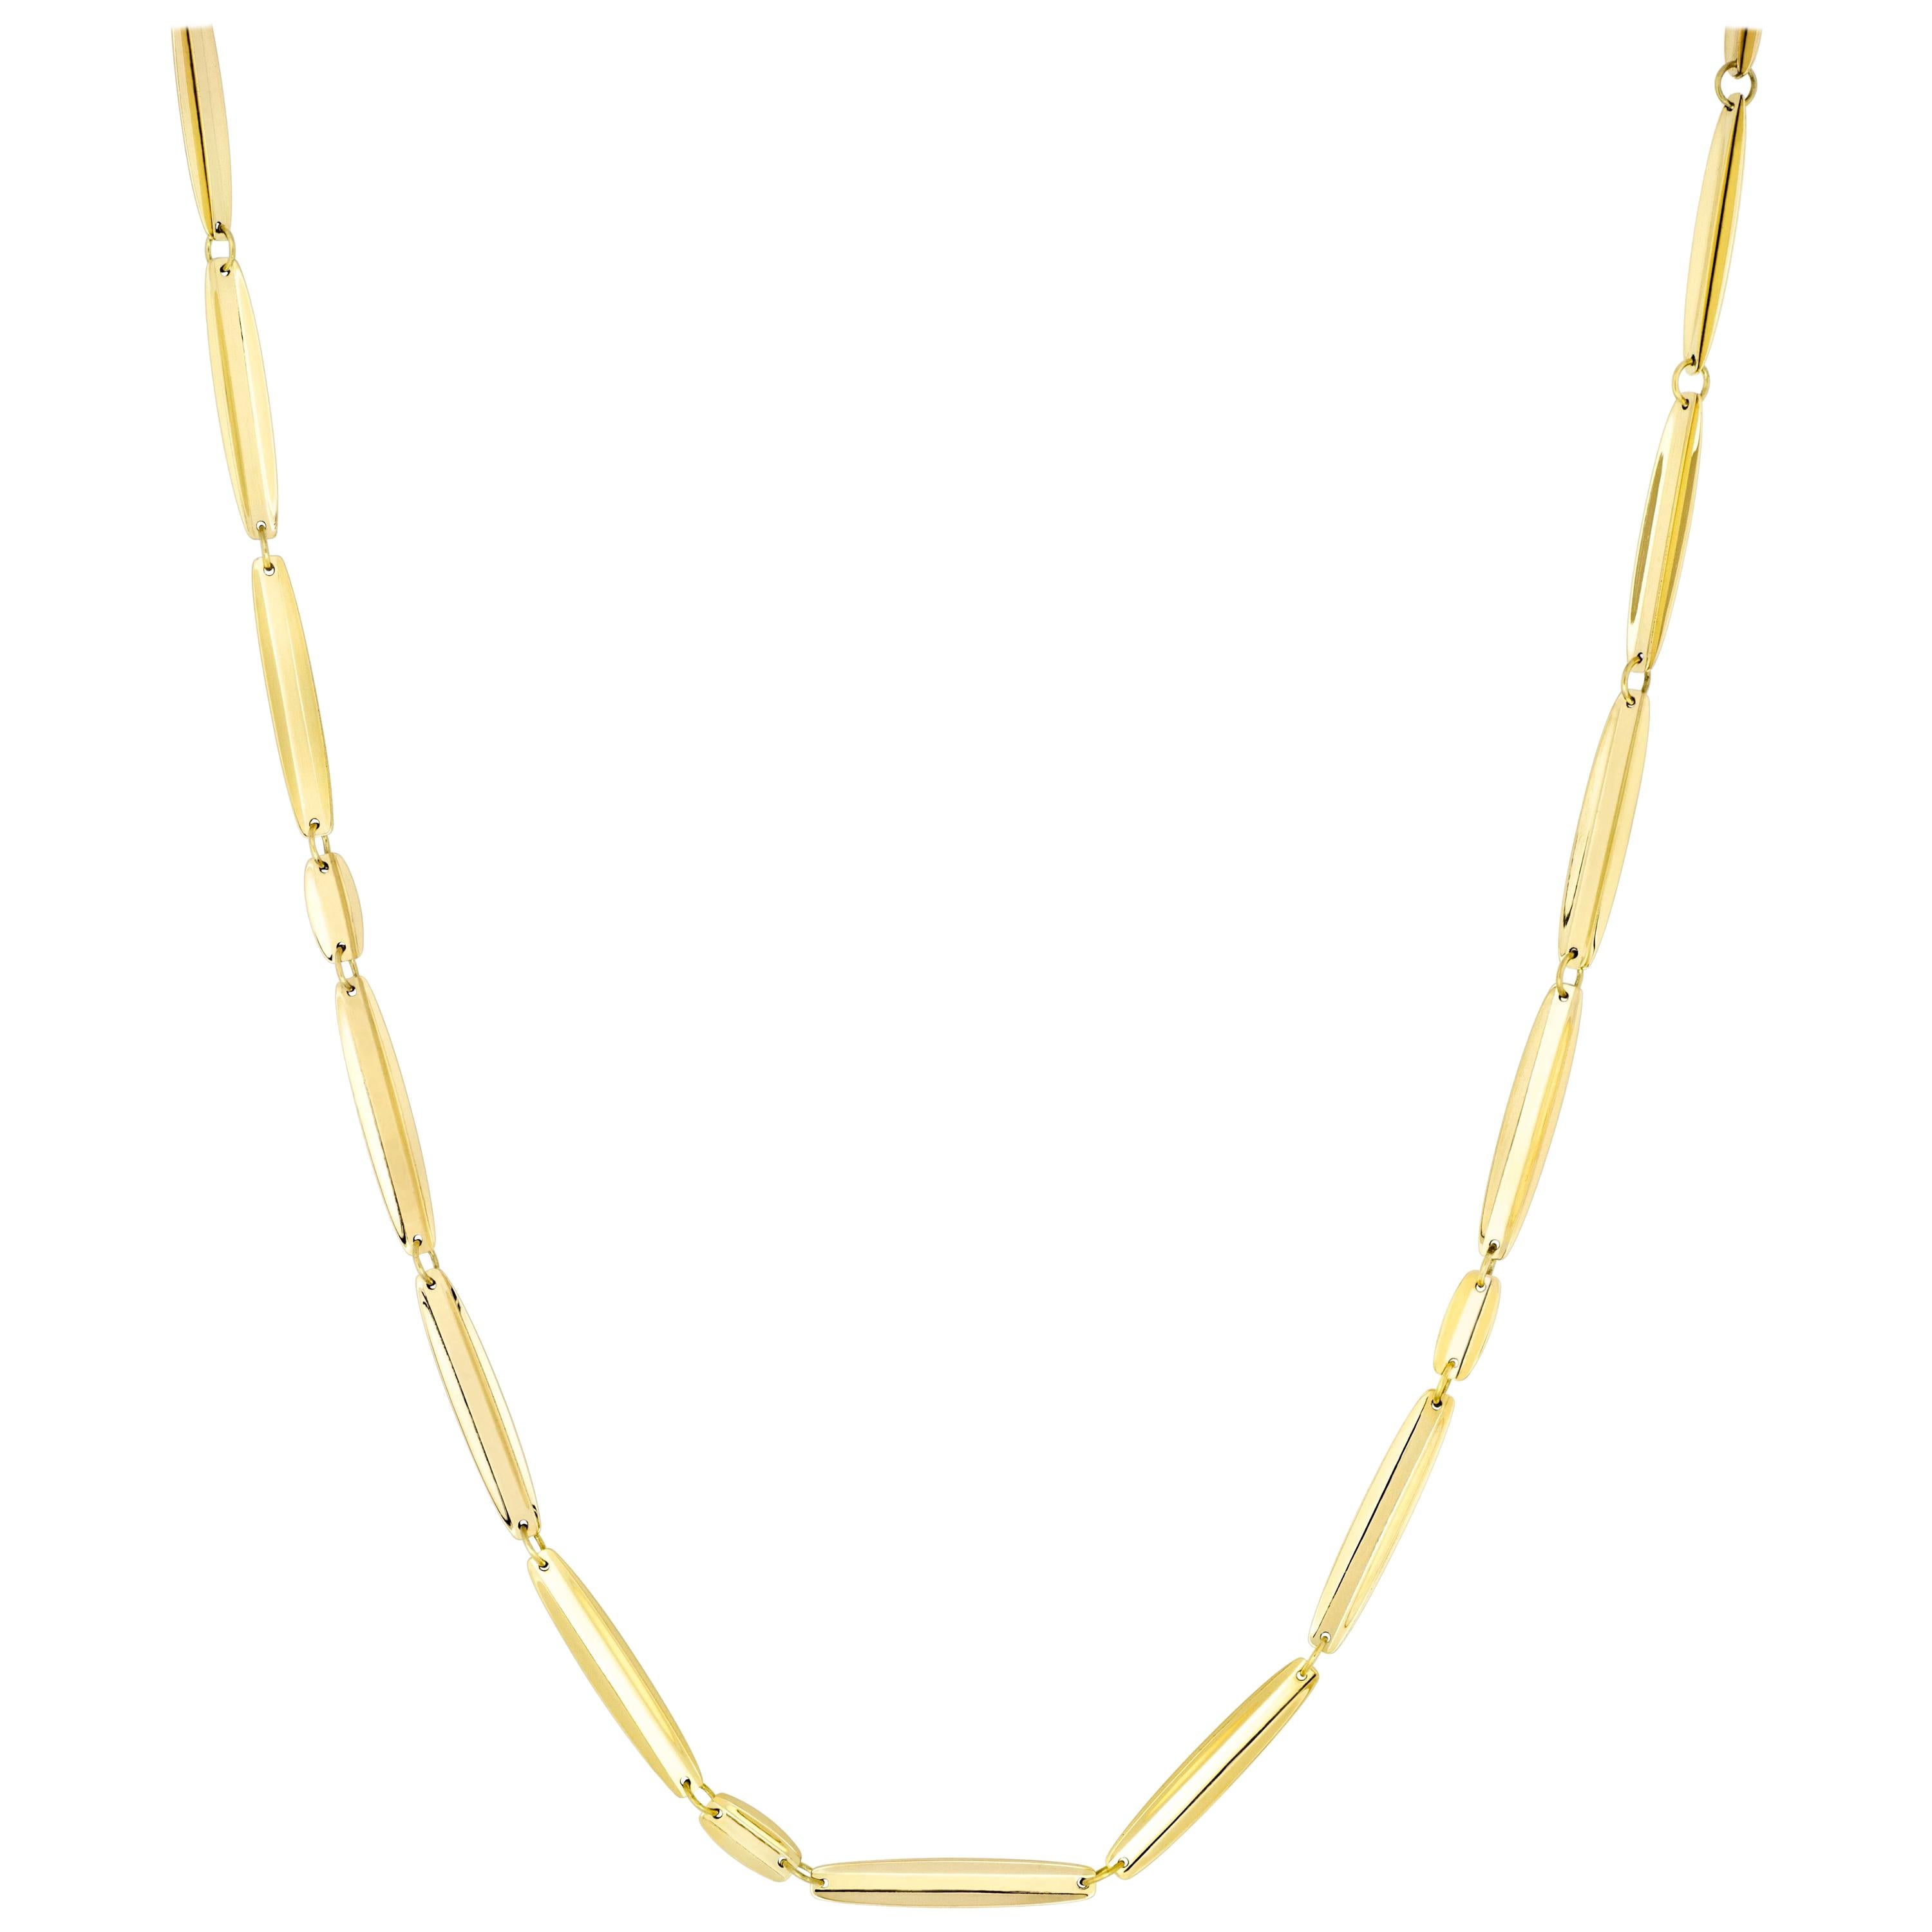 Misui 18 Karat Gold Long Necklace with Oval Elements For Sale